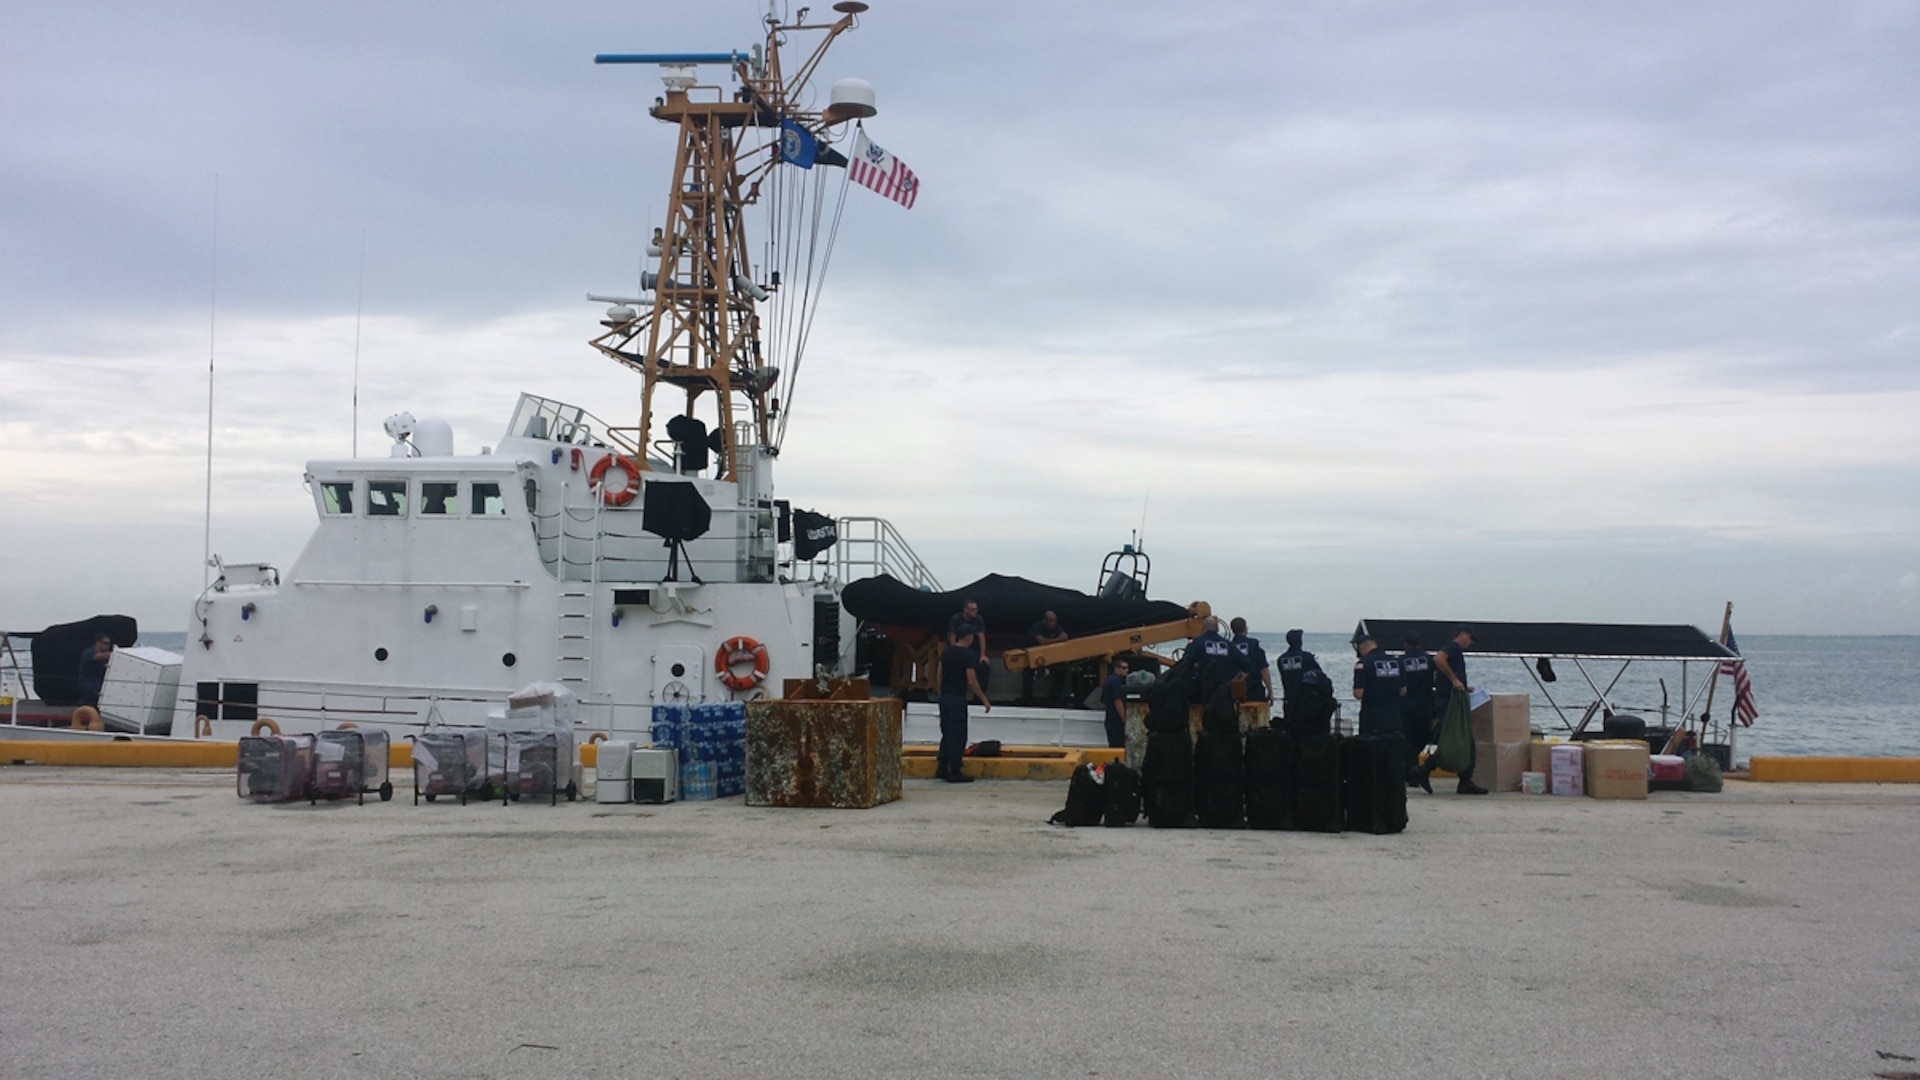 In this file, Coast Guard crews from the cutter Assateague and the Strike Team offload supplies from the cutter in Tanapag Harbor, Saipan, Aug. 5, 2015. The Assateague has an area of responsibility equivalent to the size of the continental United States. 